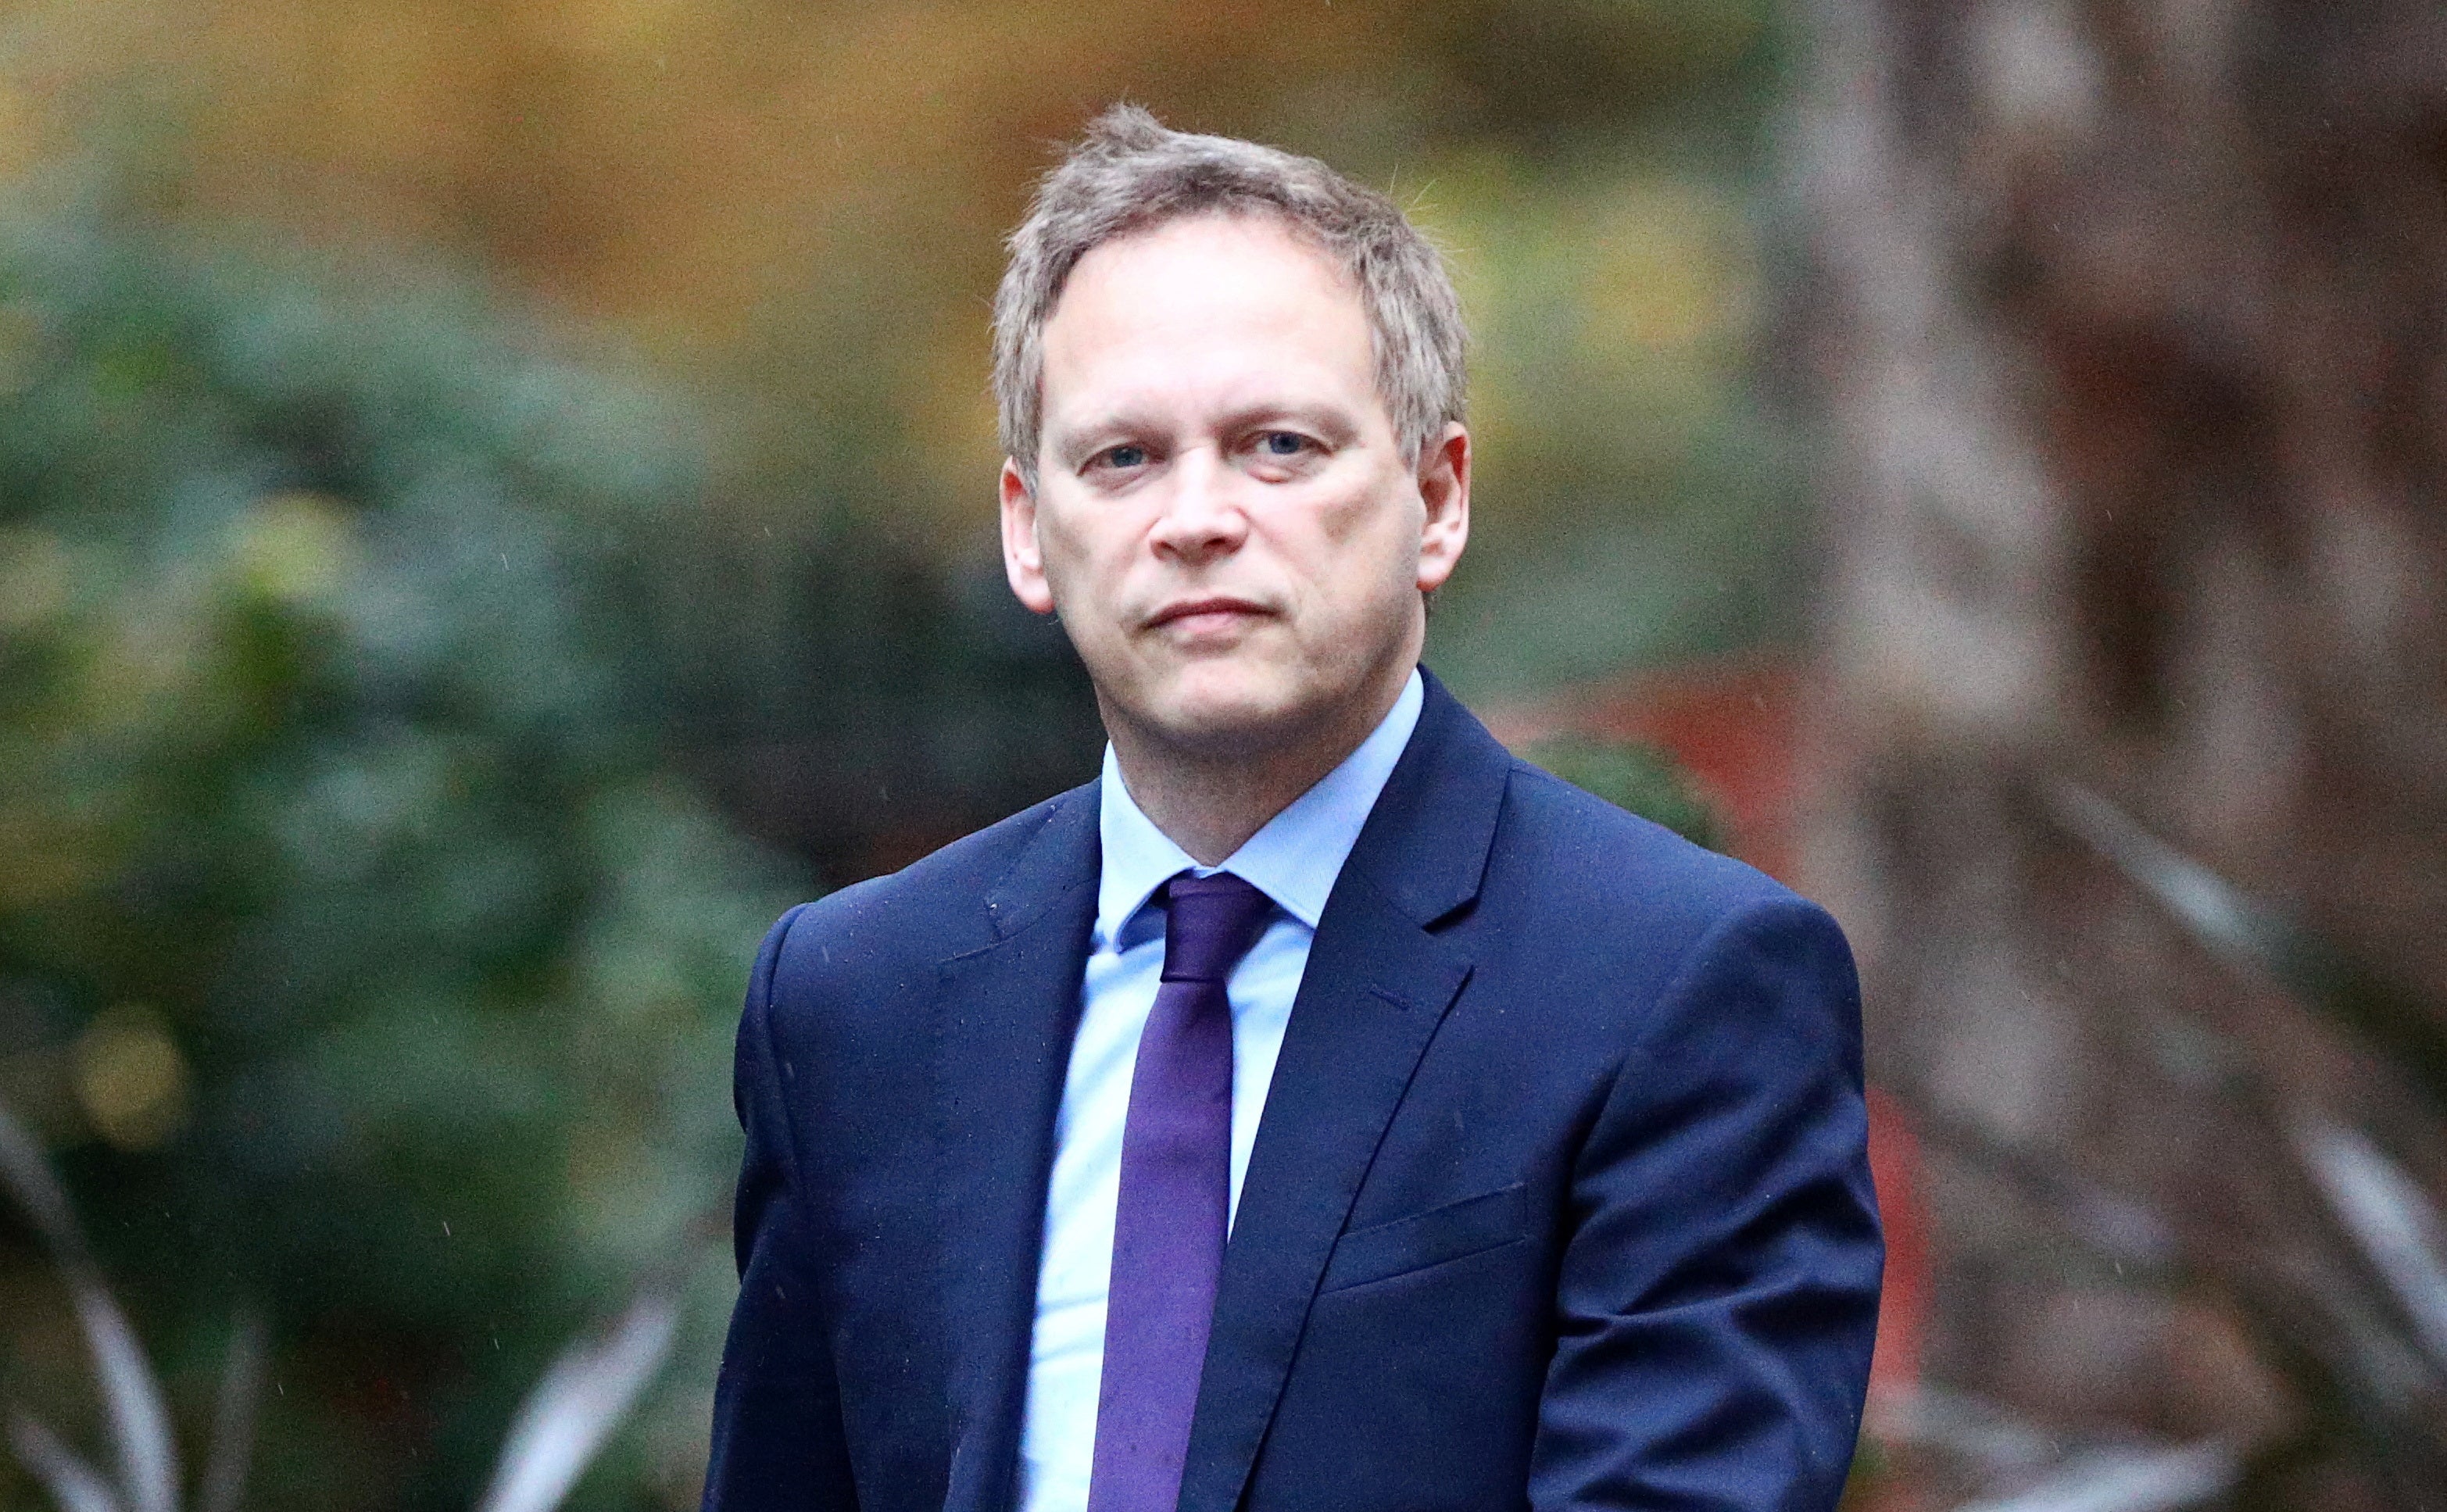 vladimir putin could target uk again with novichok-style attack, warns grant shapps